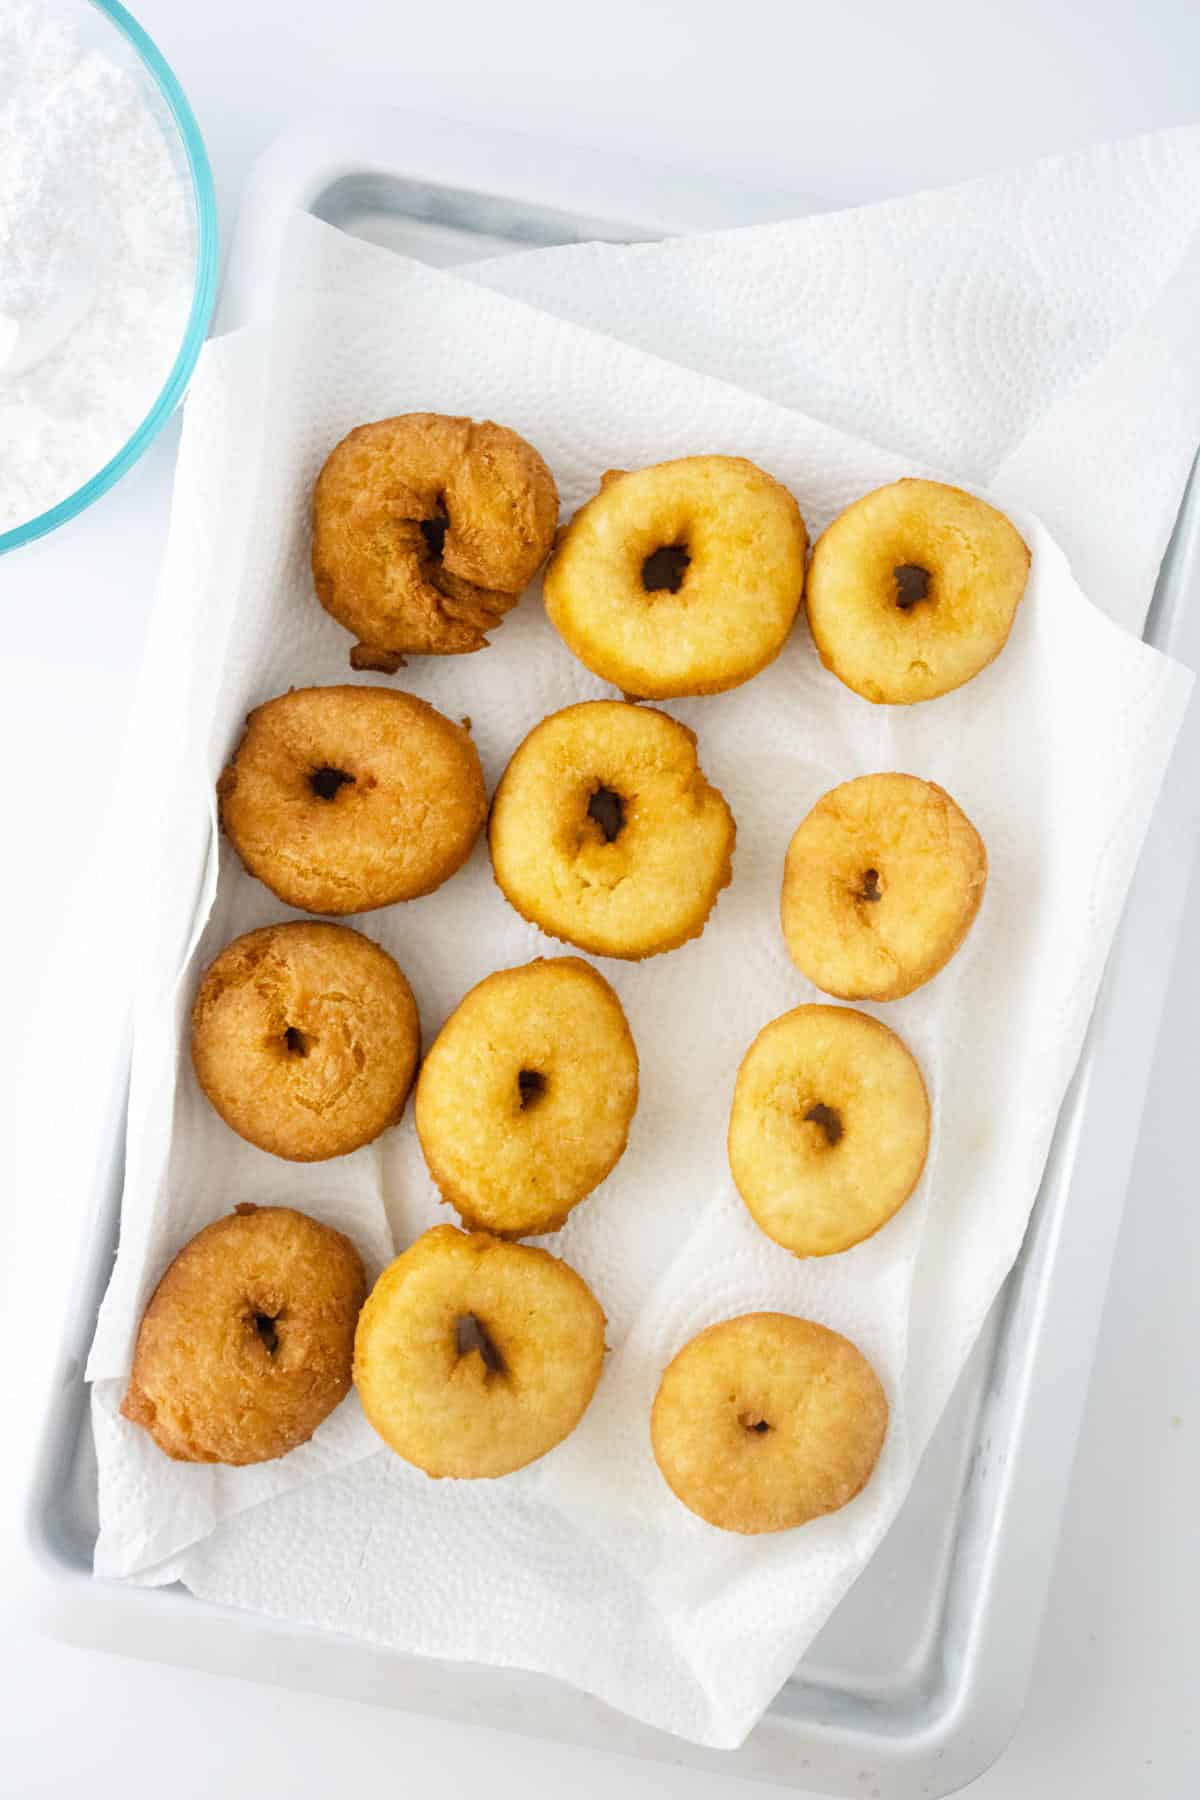 donuts cooling on paper towels.